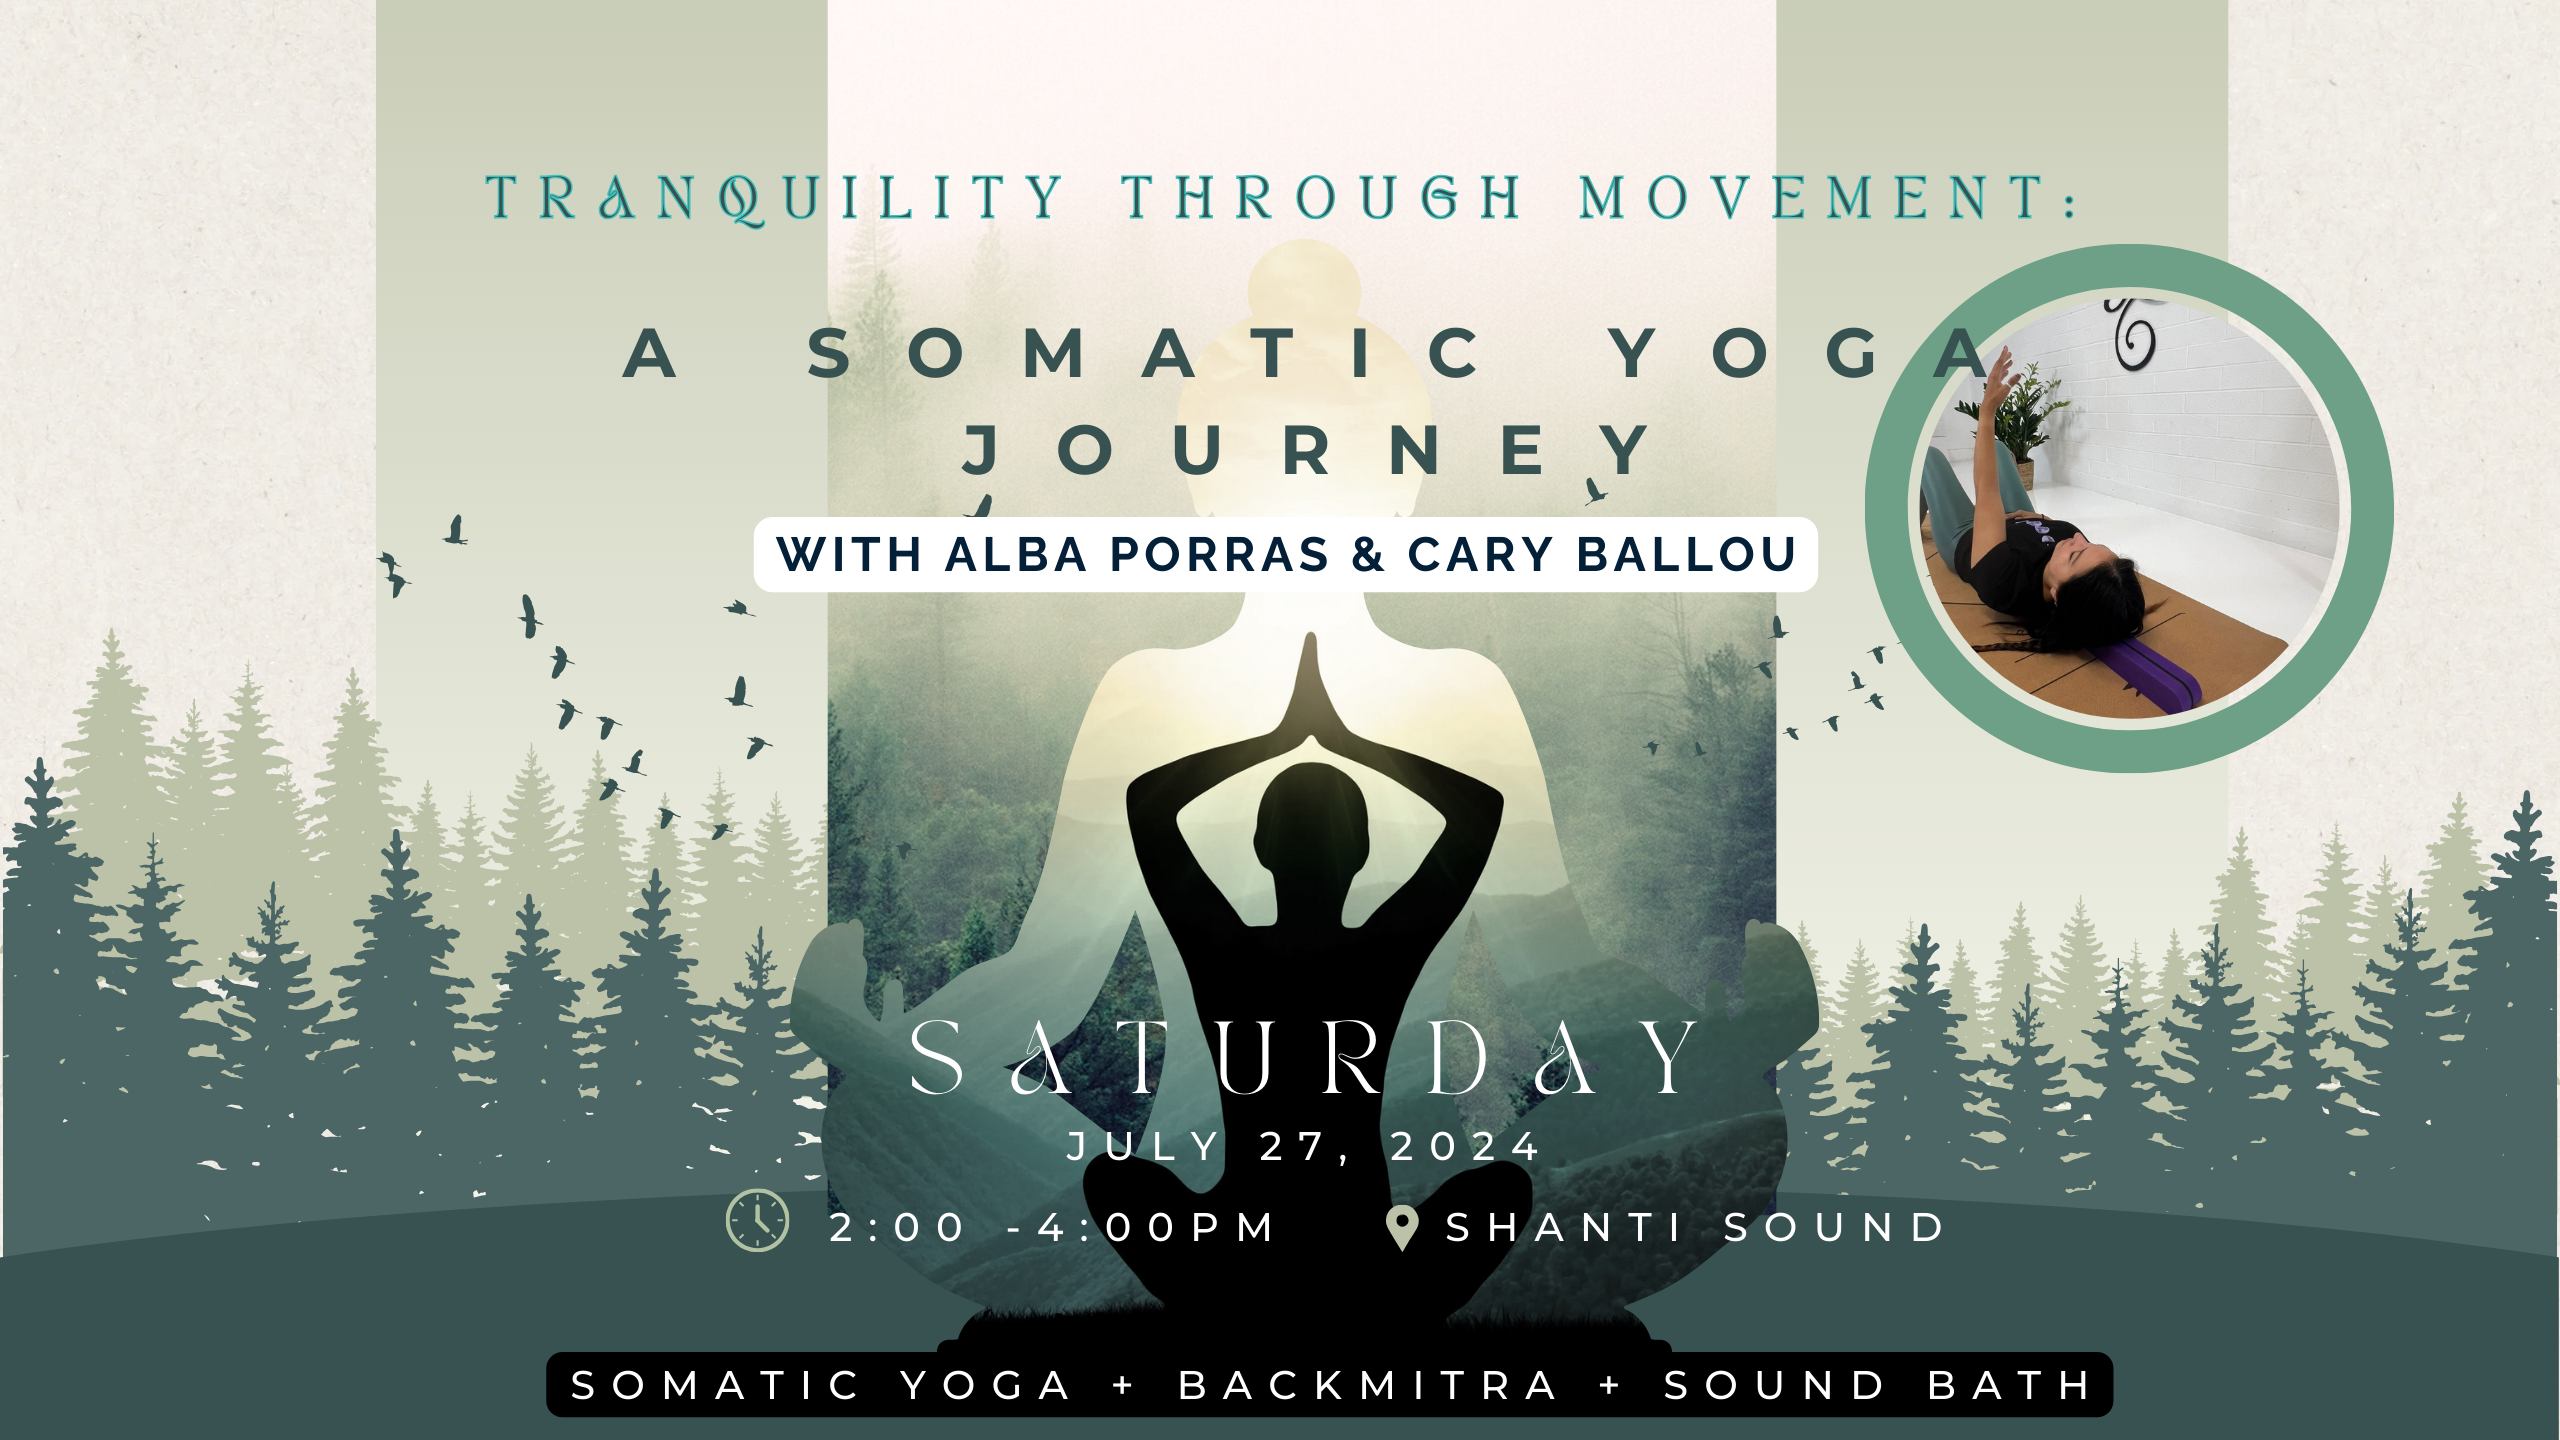 Featured image for “Tranquility Through Movement: A Somatic Yoga Journey”